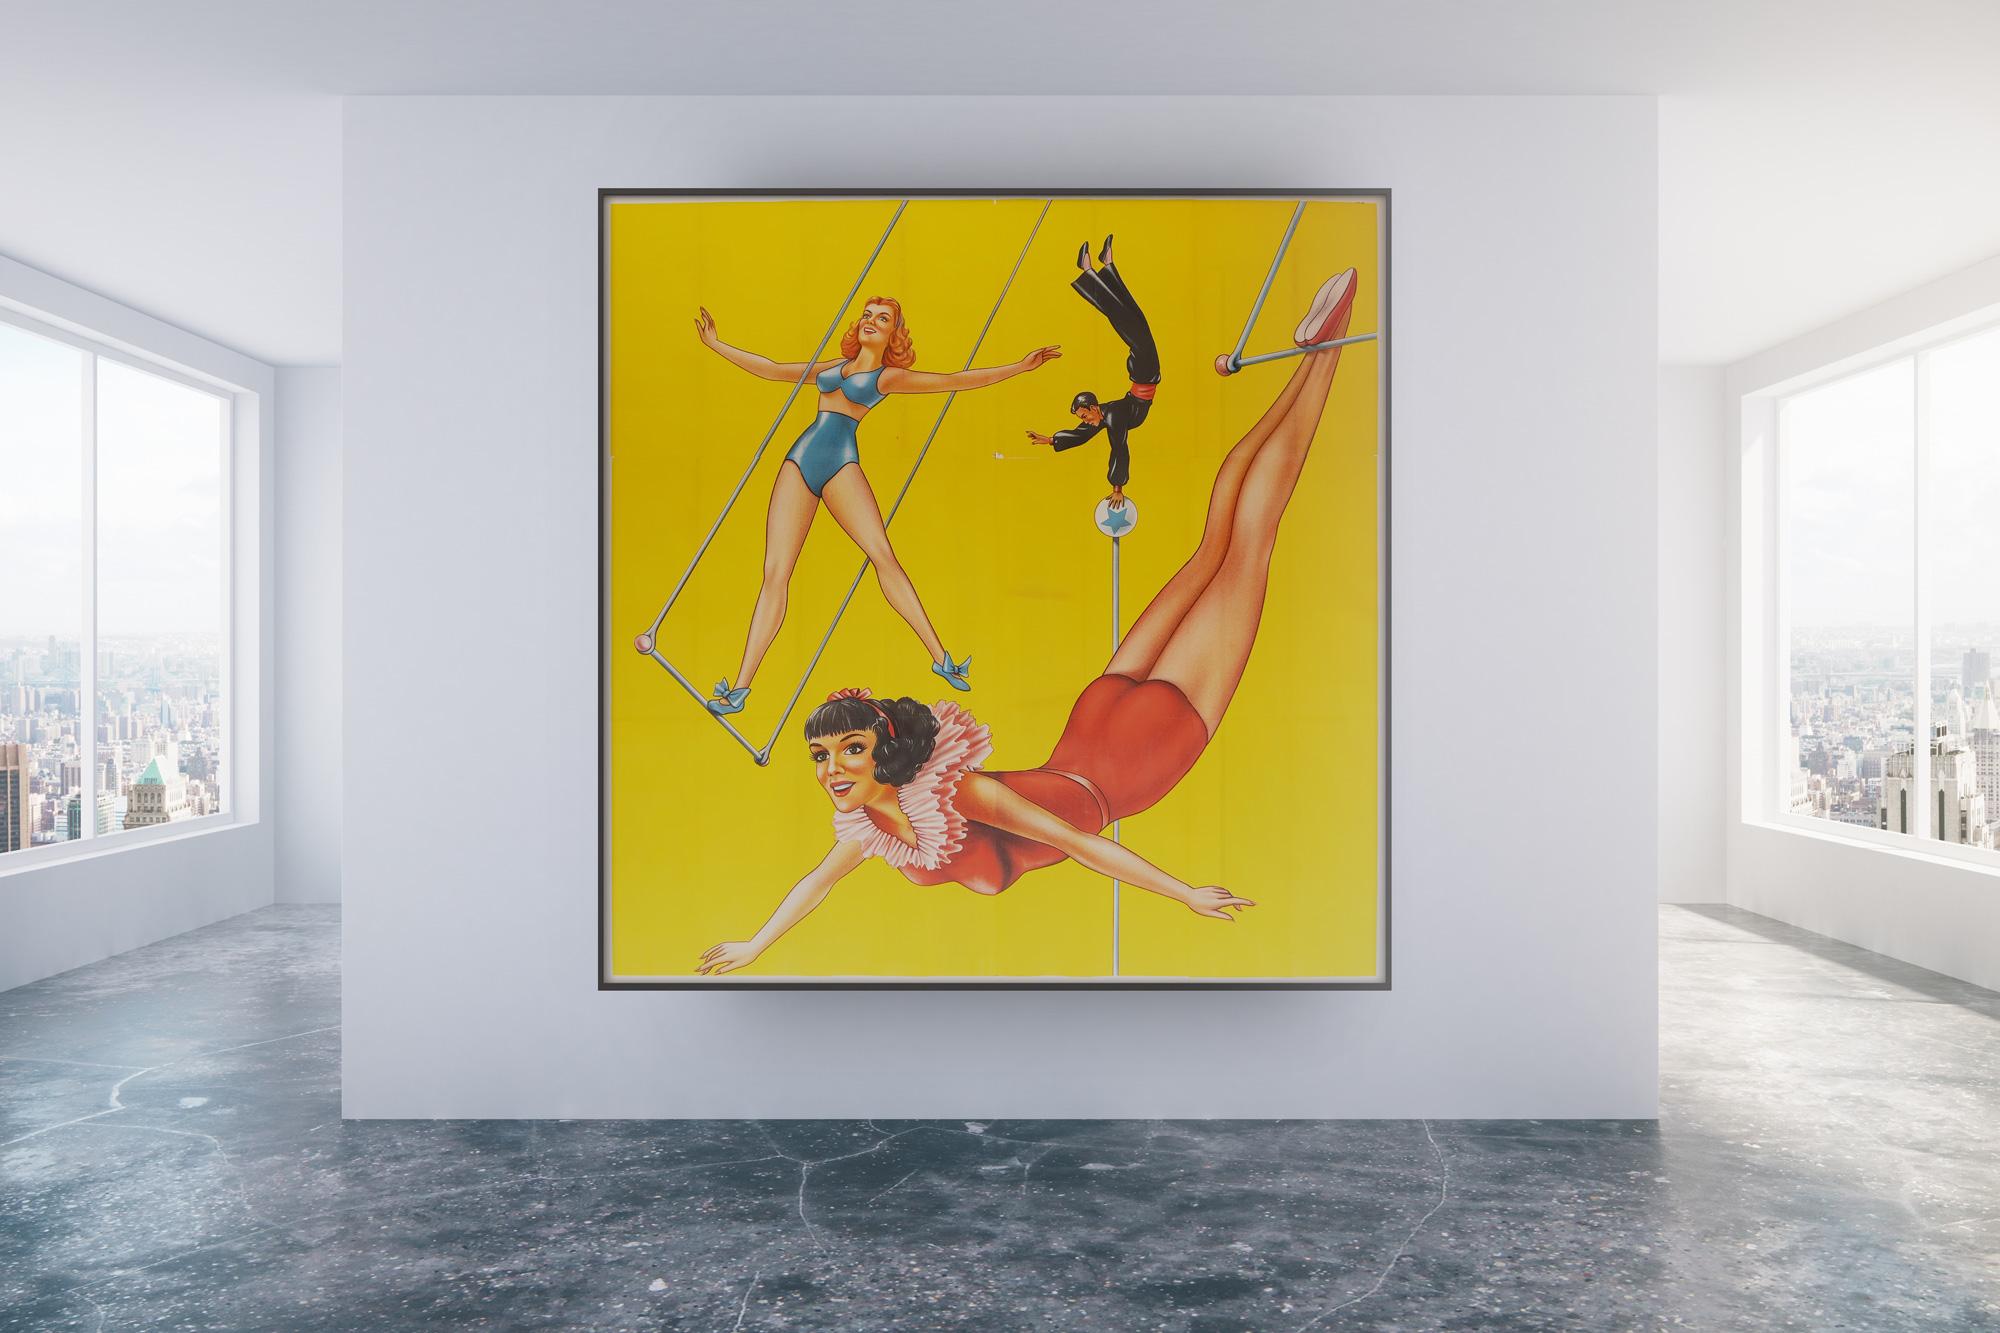 Superb and exceptionally rare giant 1960s American Circus advertising poster. 

We simply adore the striking imagery of trapeze acrobats against a bold yellow background. A stunning poster with plenty of wow factor.

Originally folded (as